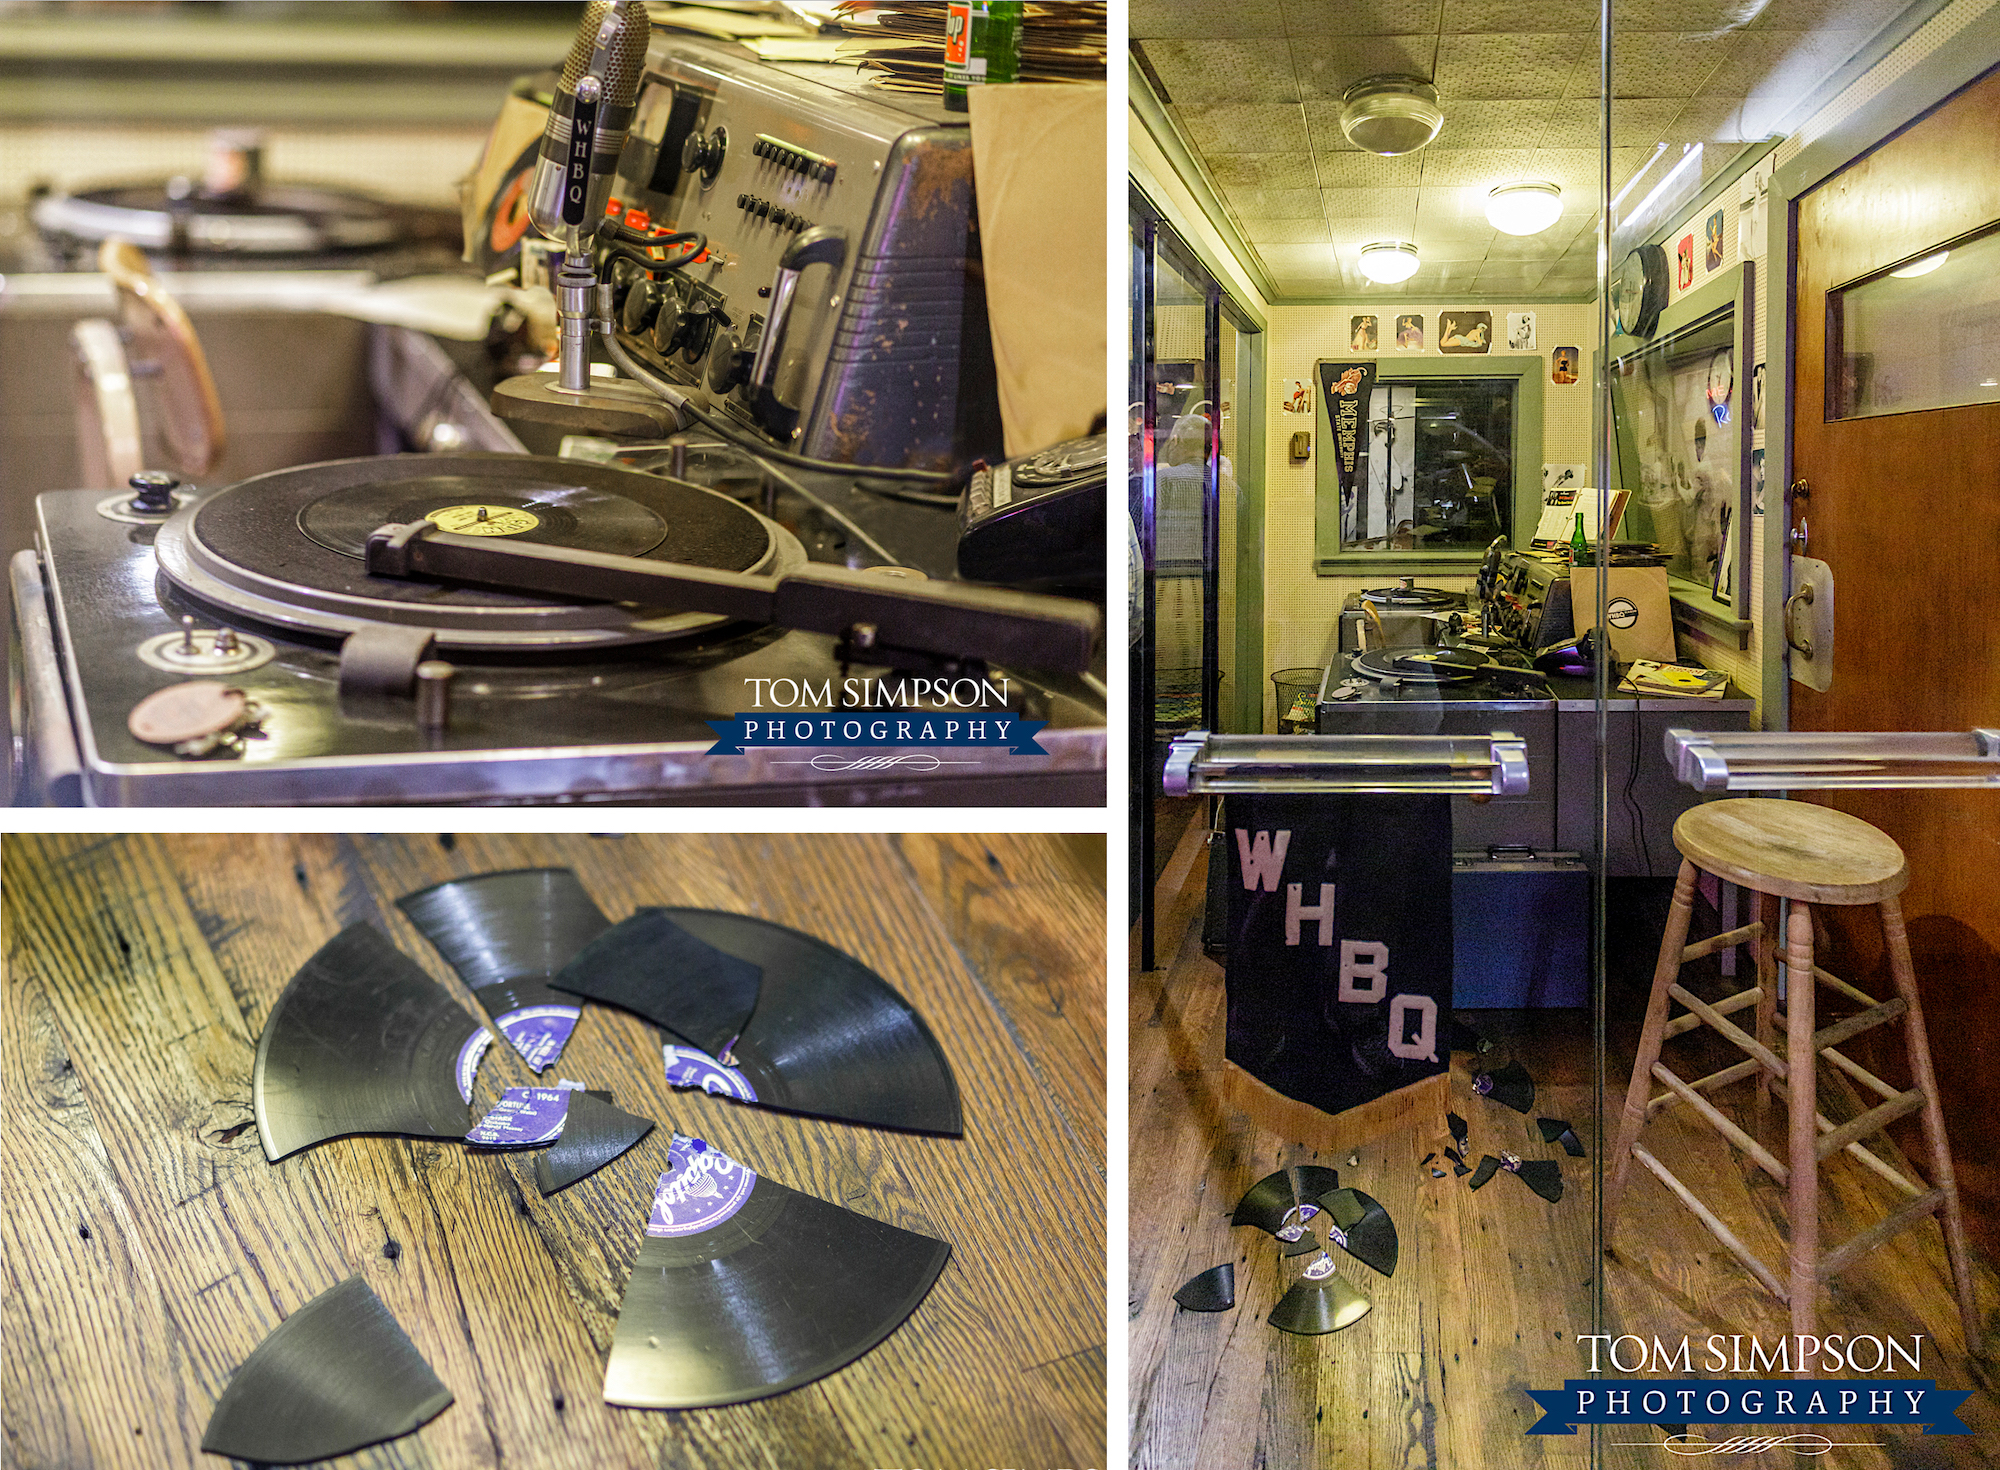 WHBQ office doors dj turntable smashed record